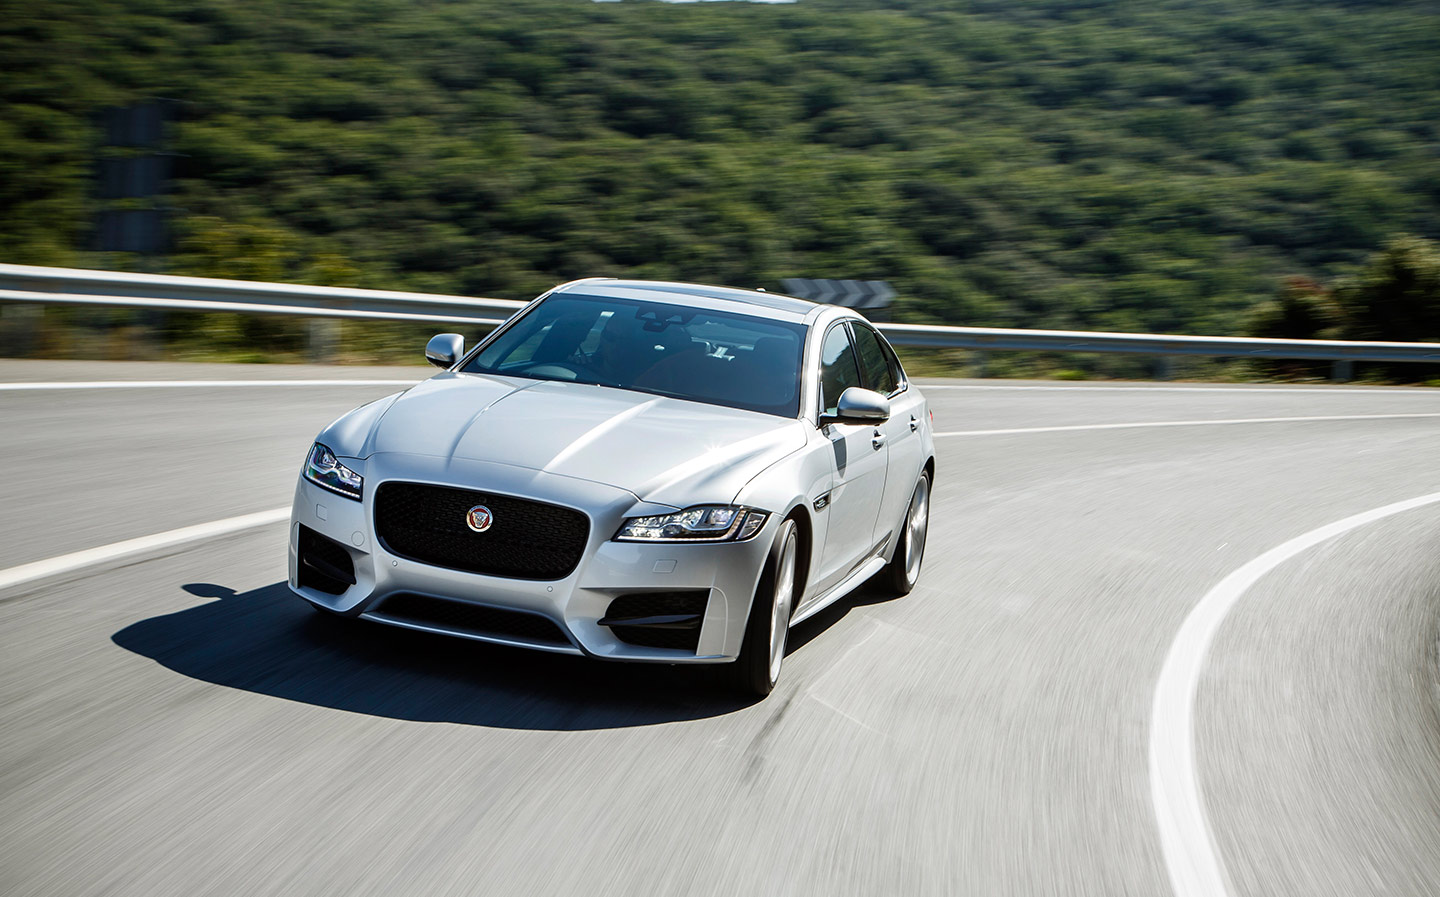 Jaguar XF is voted car of the year by 10000 drivers